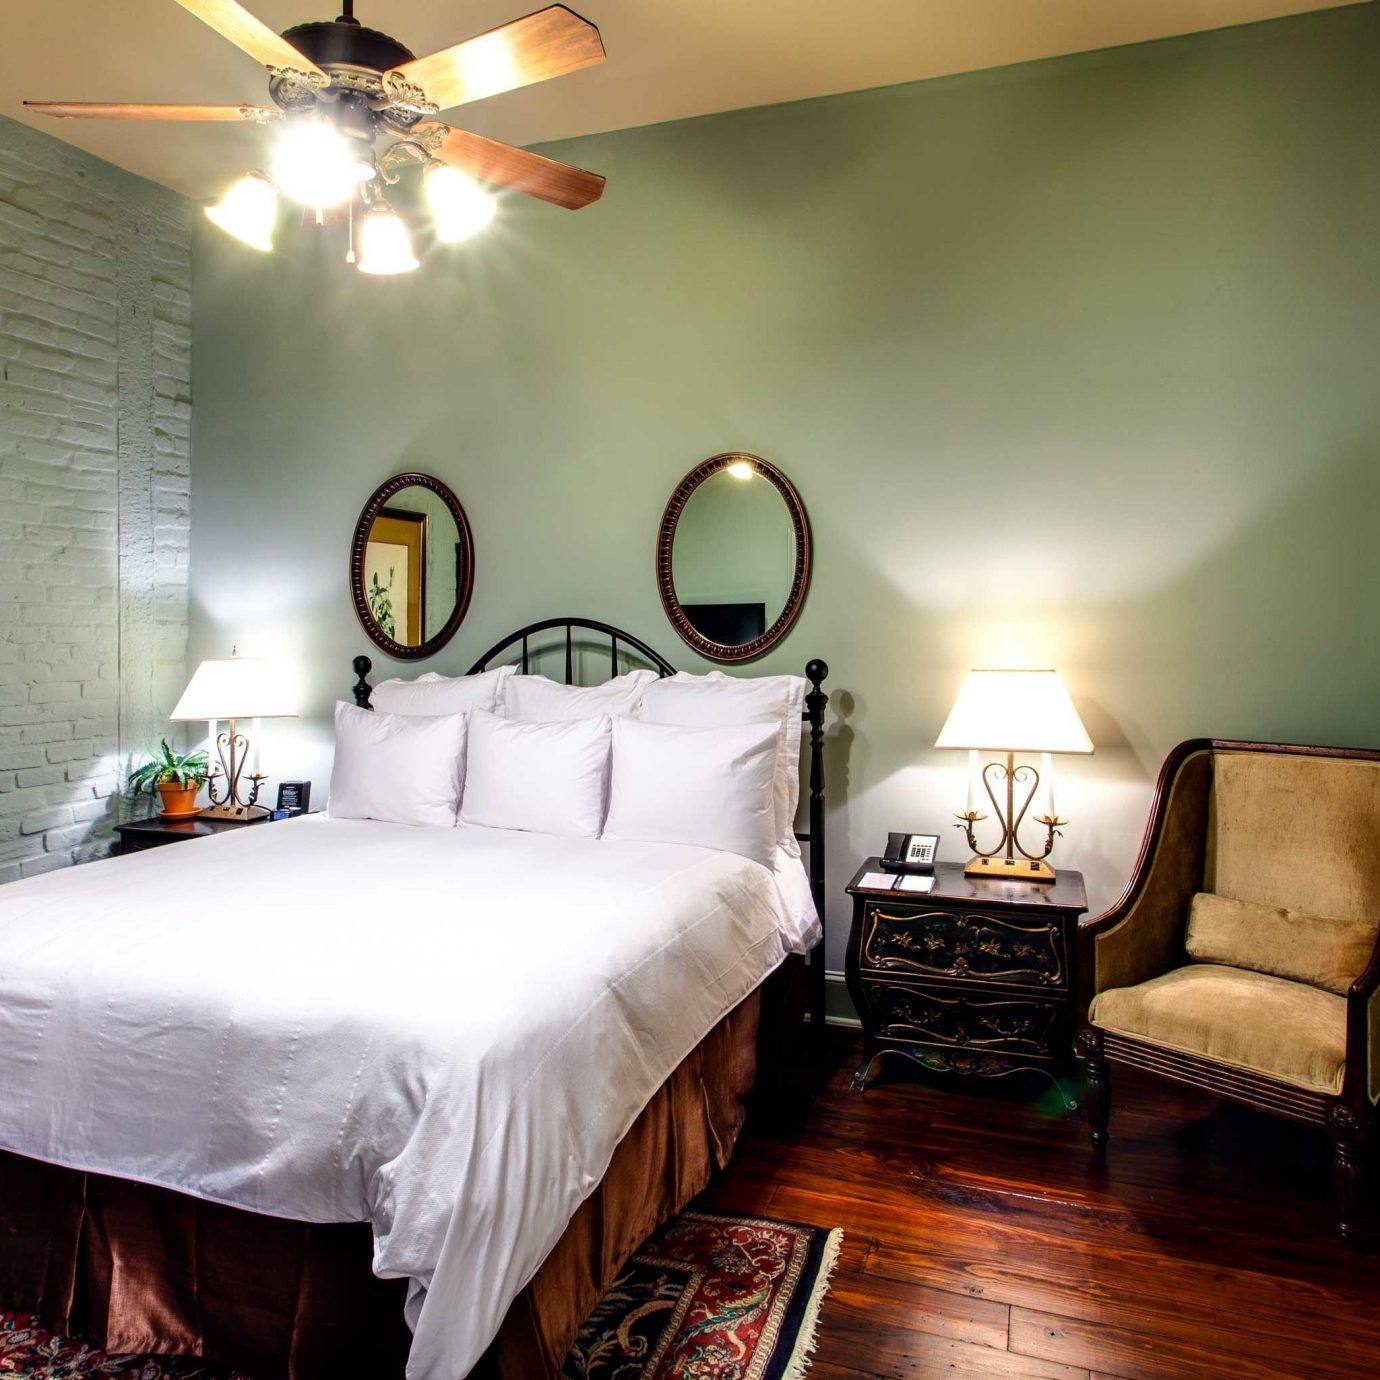 B&B Bedroom Cultural Drink Eat Entertainment Nightlife property cottage Suite home Villa farmhouse painting